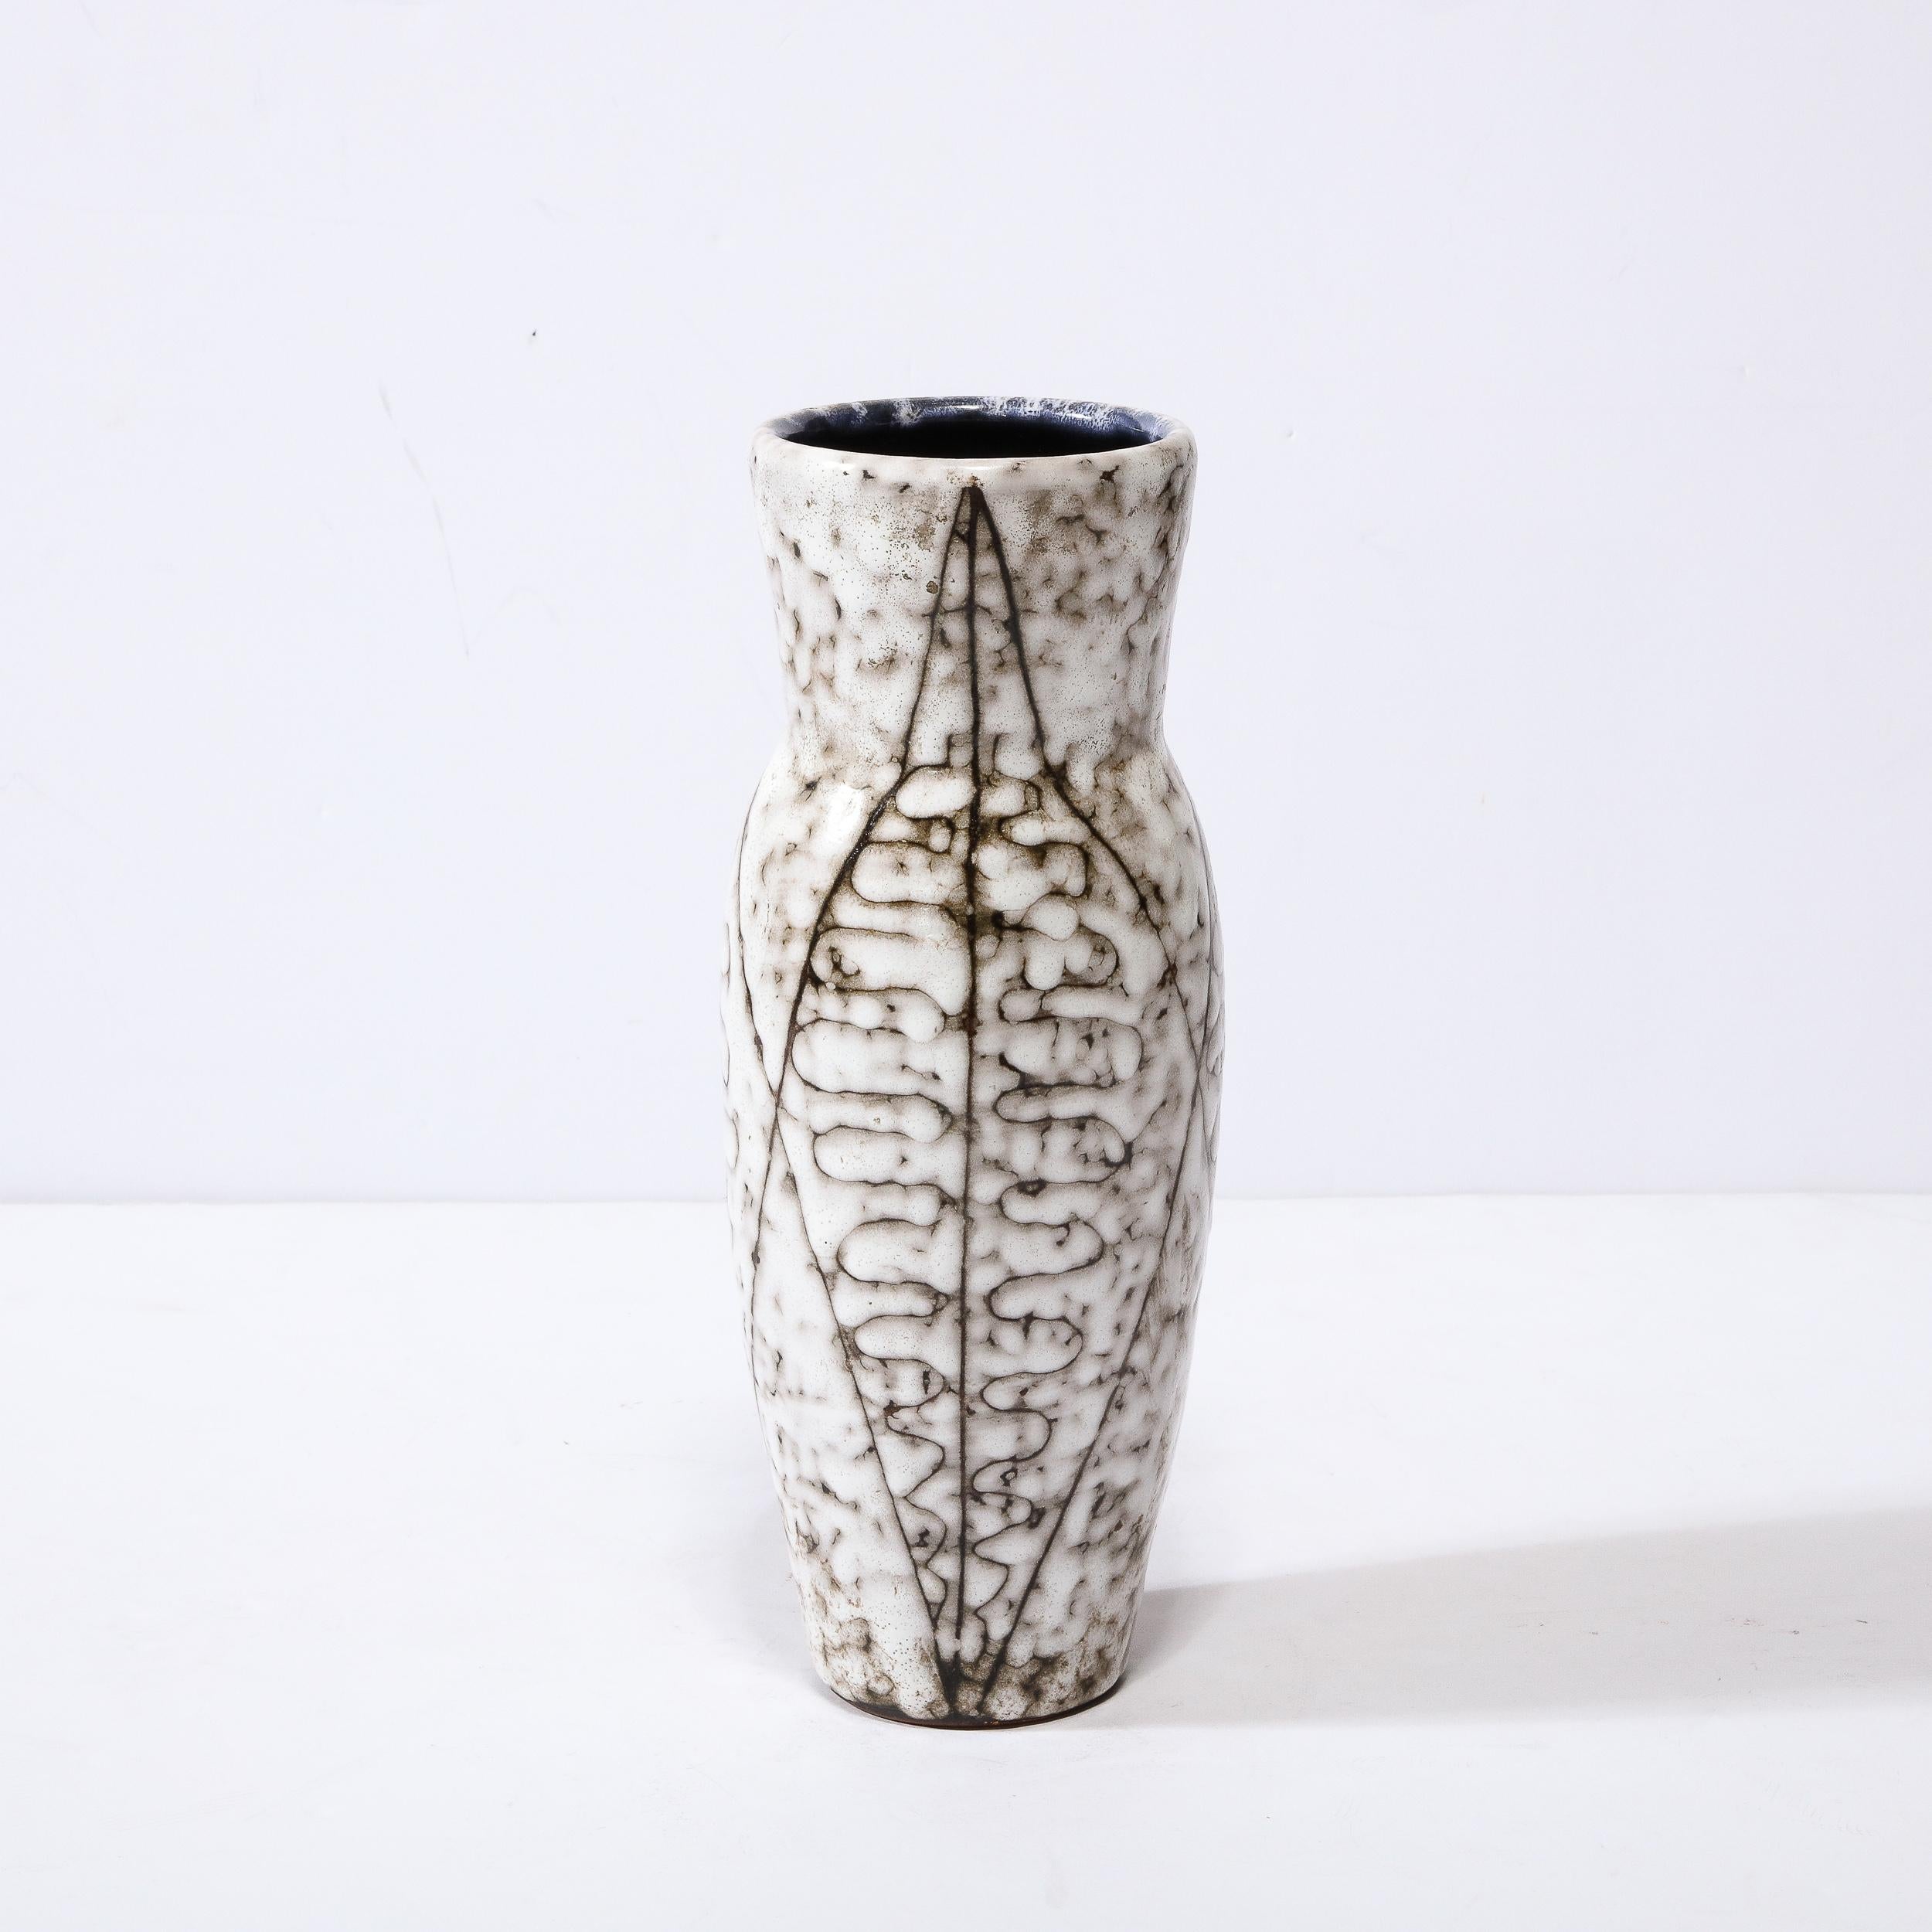 This Mid-Century Modernist White and Earth Toned Ceramic Vase With Leaf Motif is a beautiful example of Post War European Ceramics, realized in Hódmezovasarhely Majolikagyár, Hungary circa 1960. With a Stunning textural finish composed in Cream